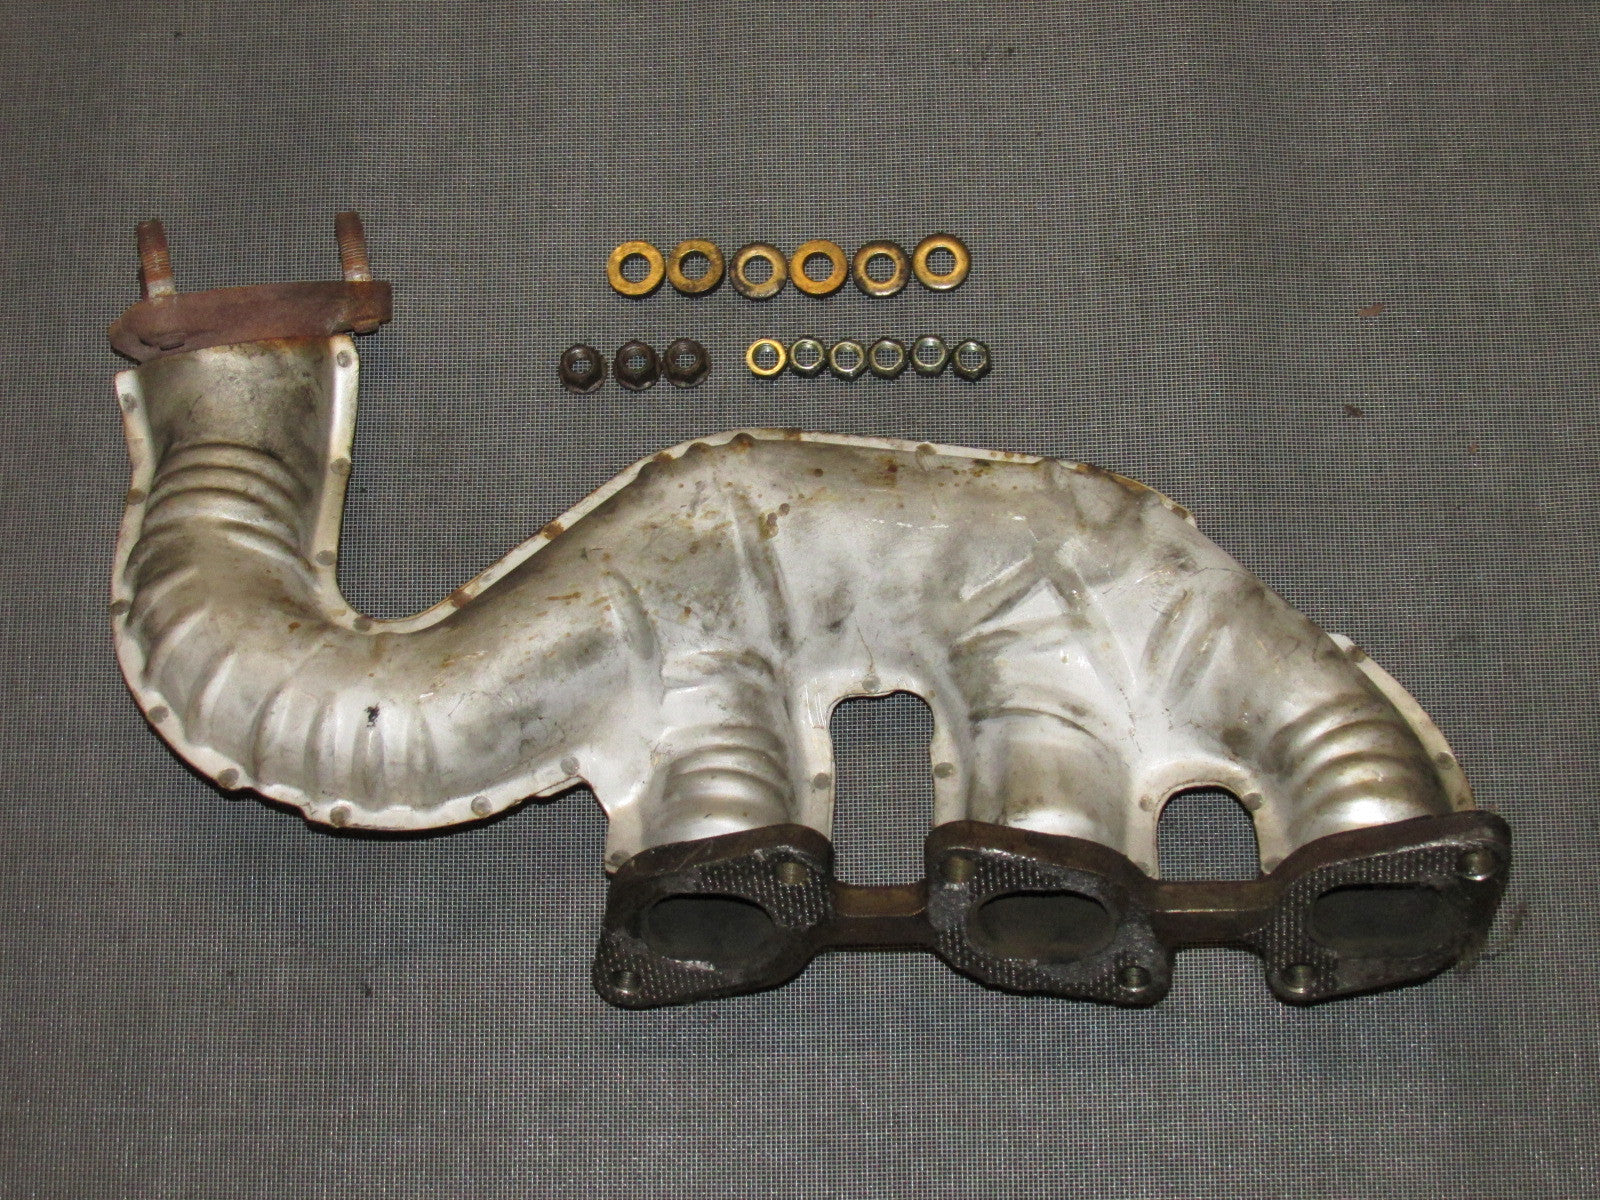 90 91 92 93 94 95 96 Nissan 300zx OEM Exhaust Manifold - Right